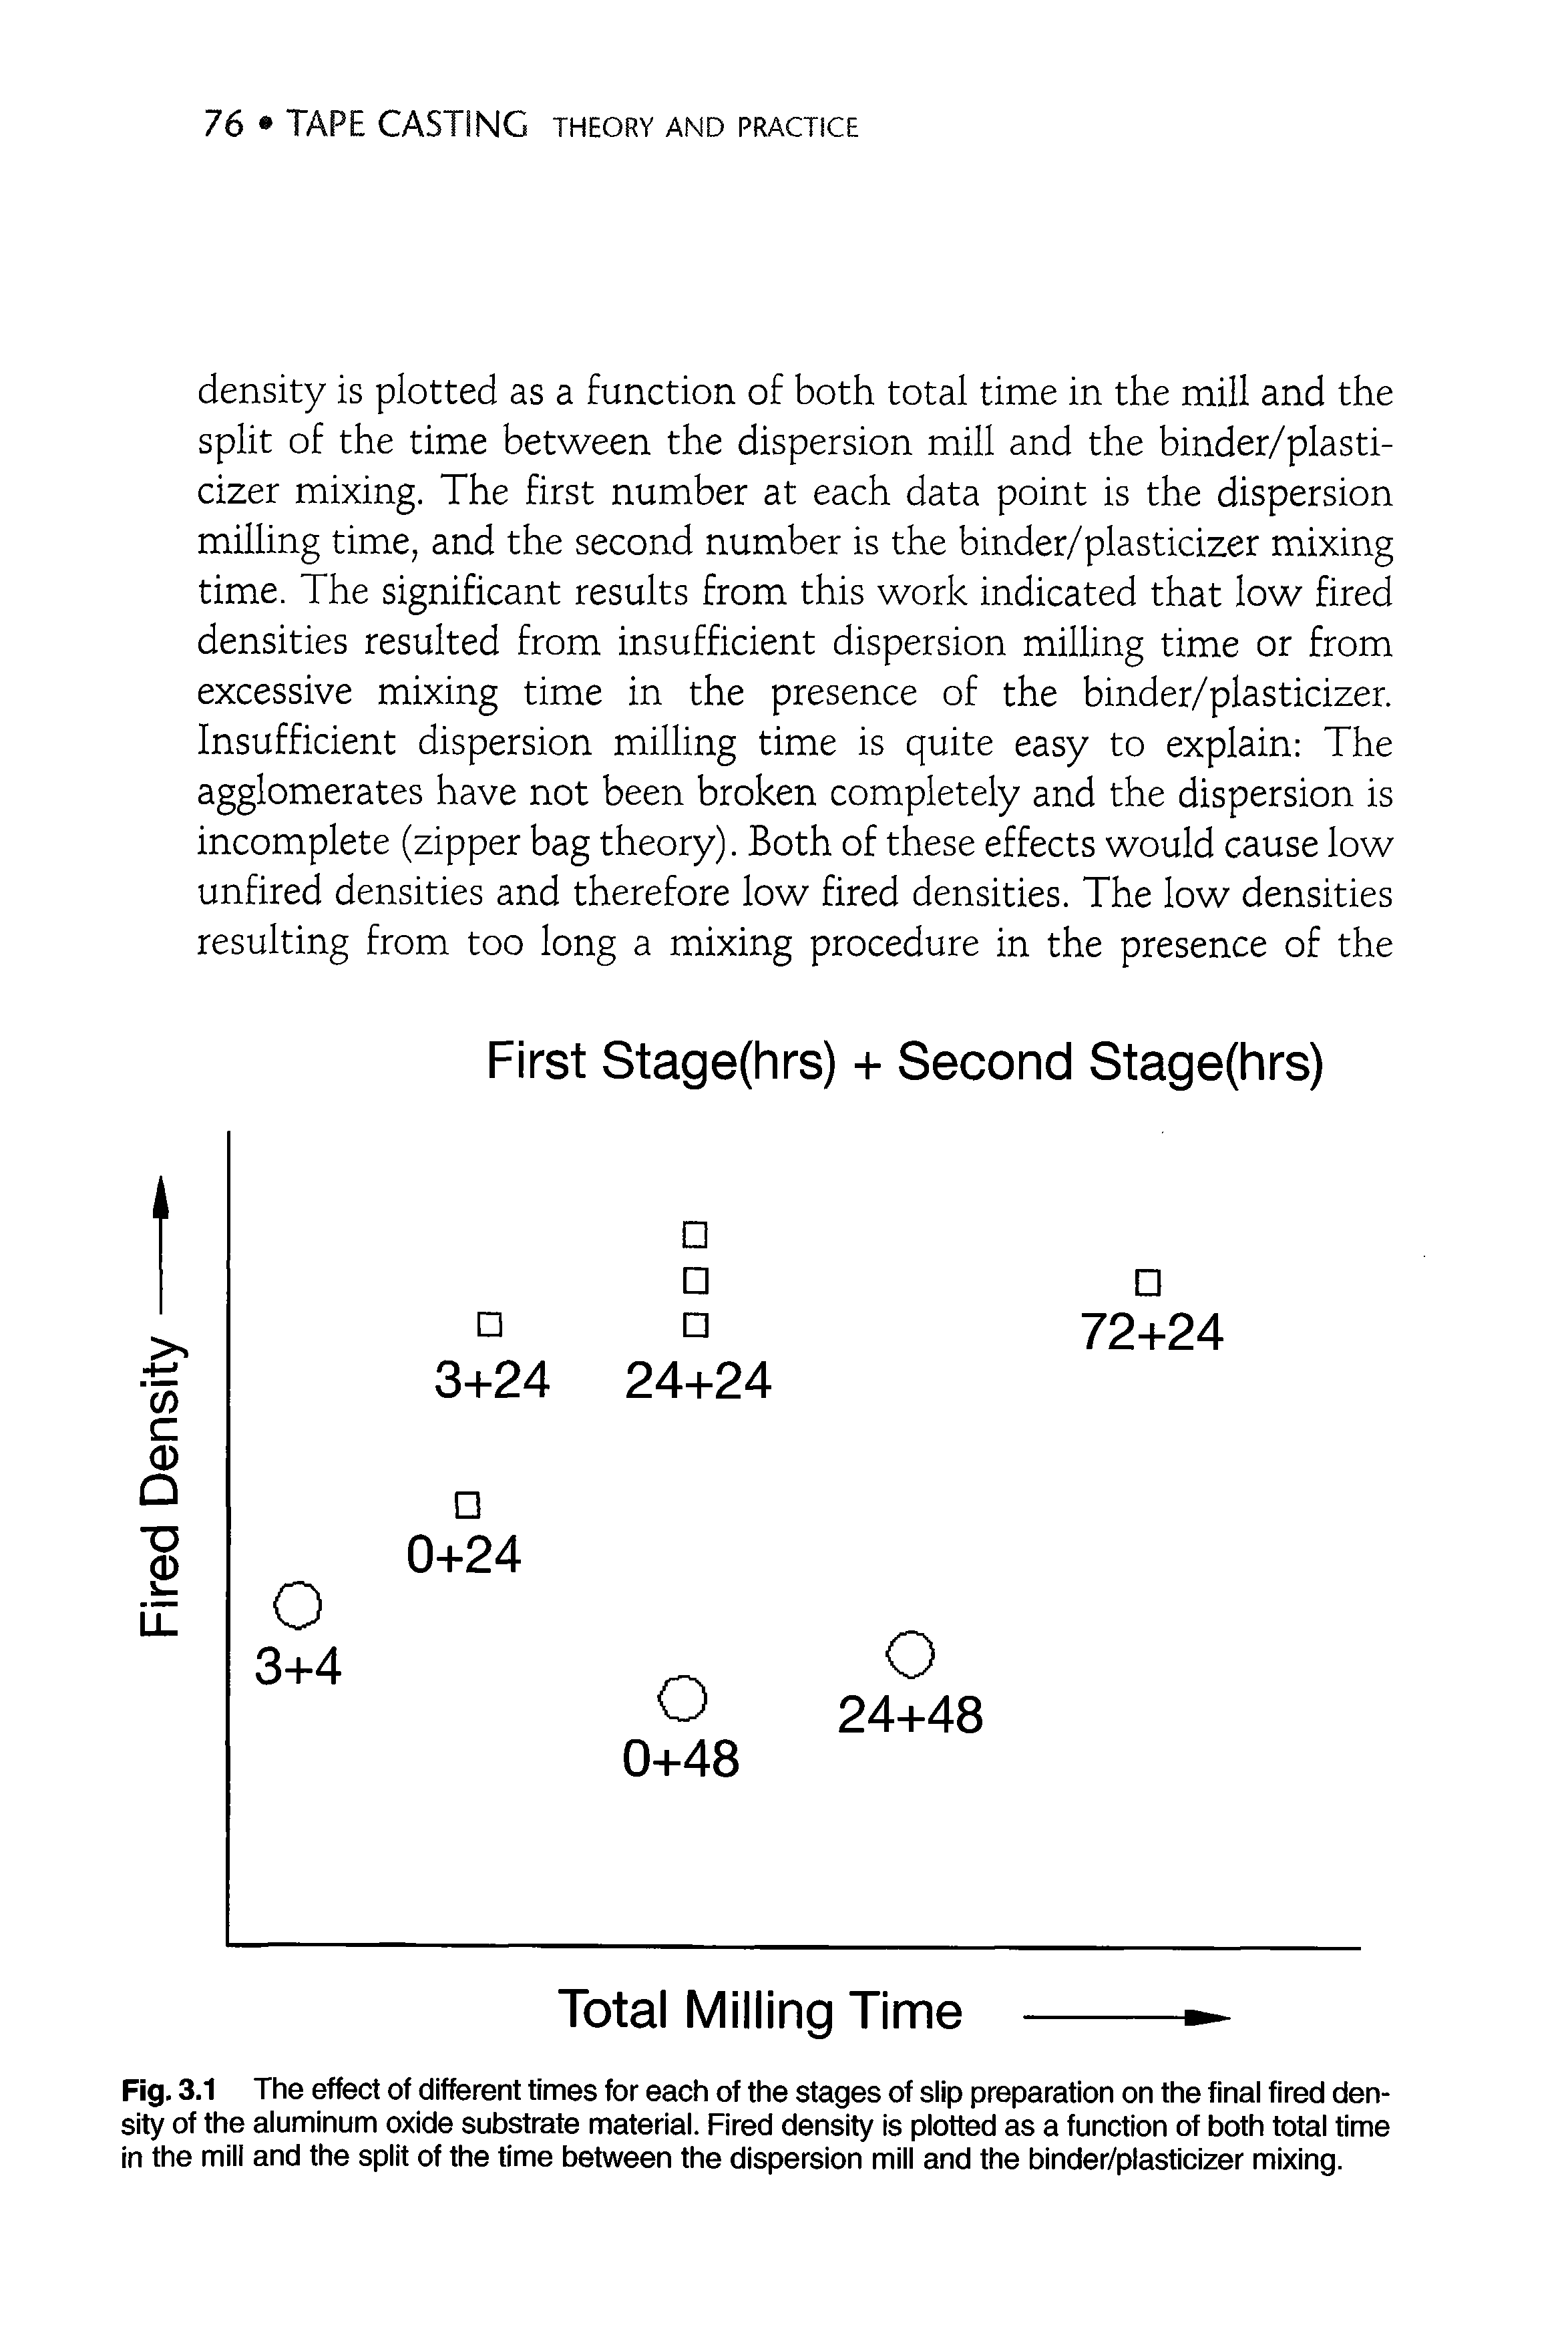 Fig. 3.1 The effect of different times for each of the stages of slip preparation on the final fired density of the aluminum oxide substrate material. Fired density is plotted as a function of both total time in the mill and the split of the time between the dispersion mill and the binder/plasticizer mixing.